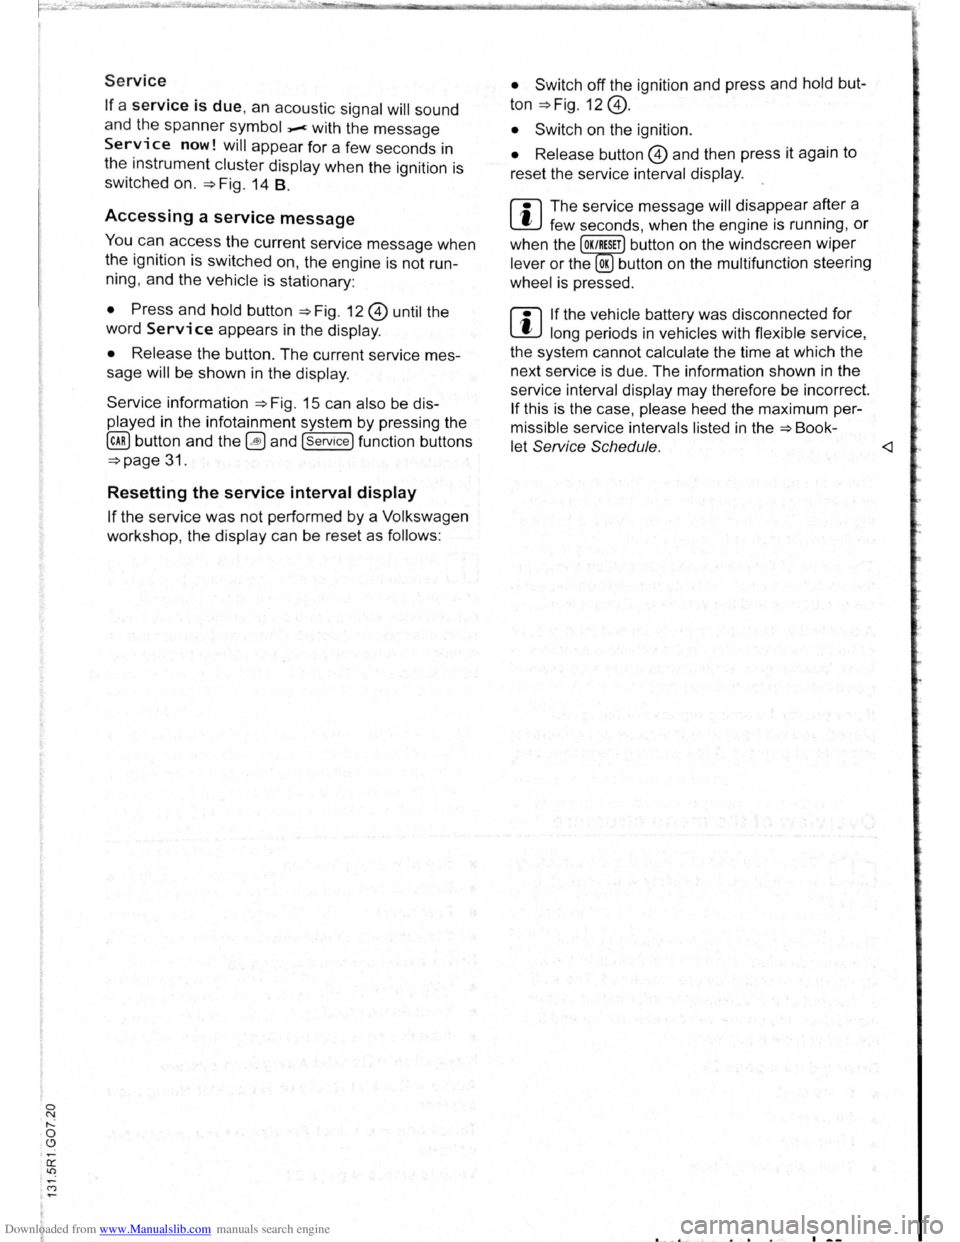 VOLKSWAGEN BEETLE 2010  Owners Manual Downloaded from www.Manualslib.com manuals search engine 0 N ,....: 0 .C) 
Service 
If a service is due, an acoustic signal will sound 
and the spanner symbol _.c with the message 
Service now! will a